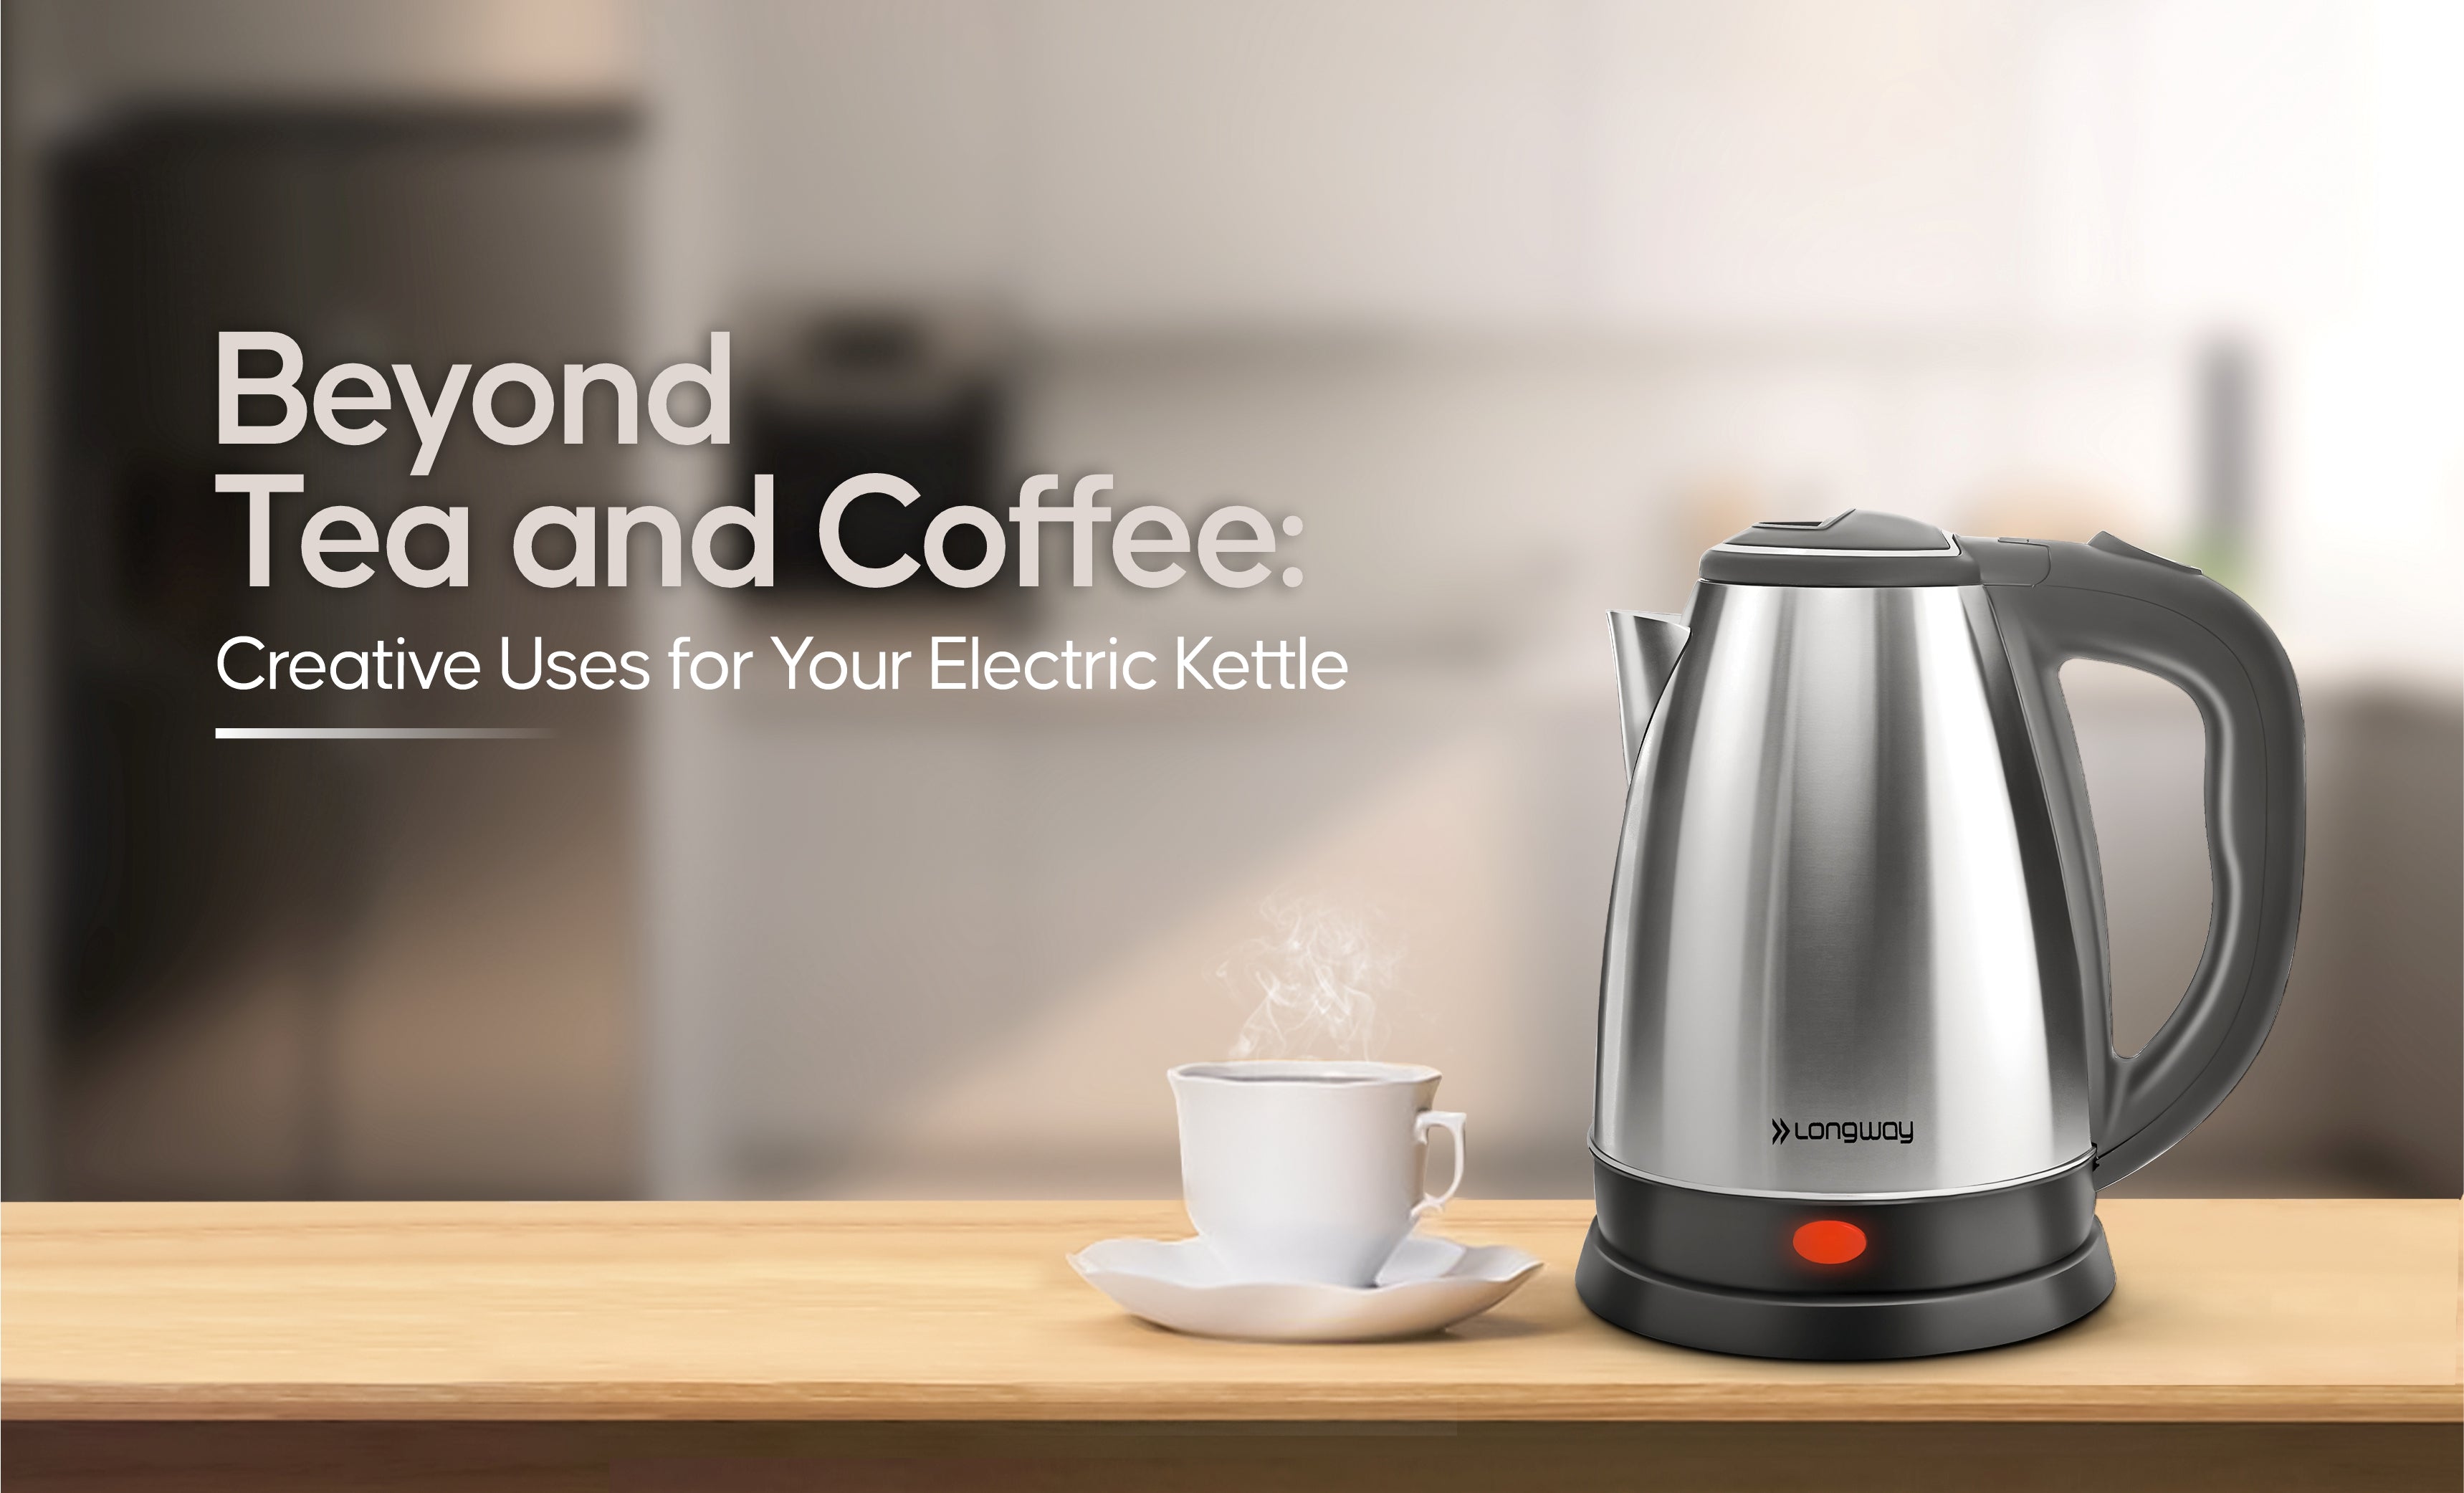 Beyond Tea and Coffee: Creative Uses for Your Electric Kettle